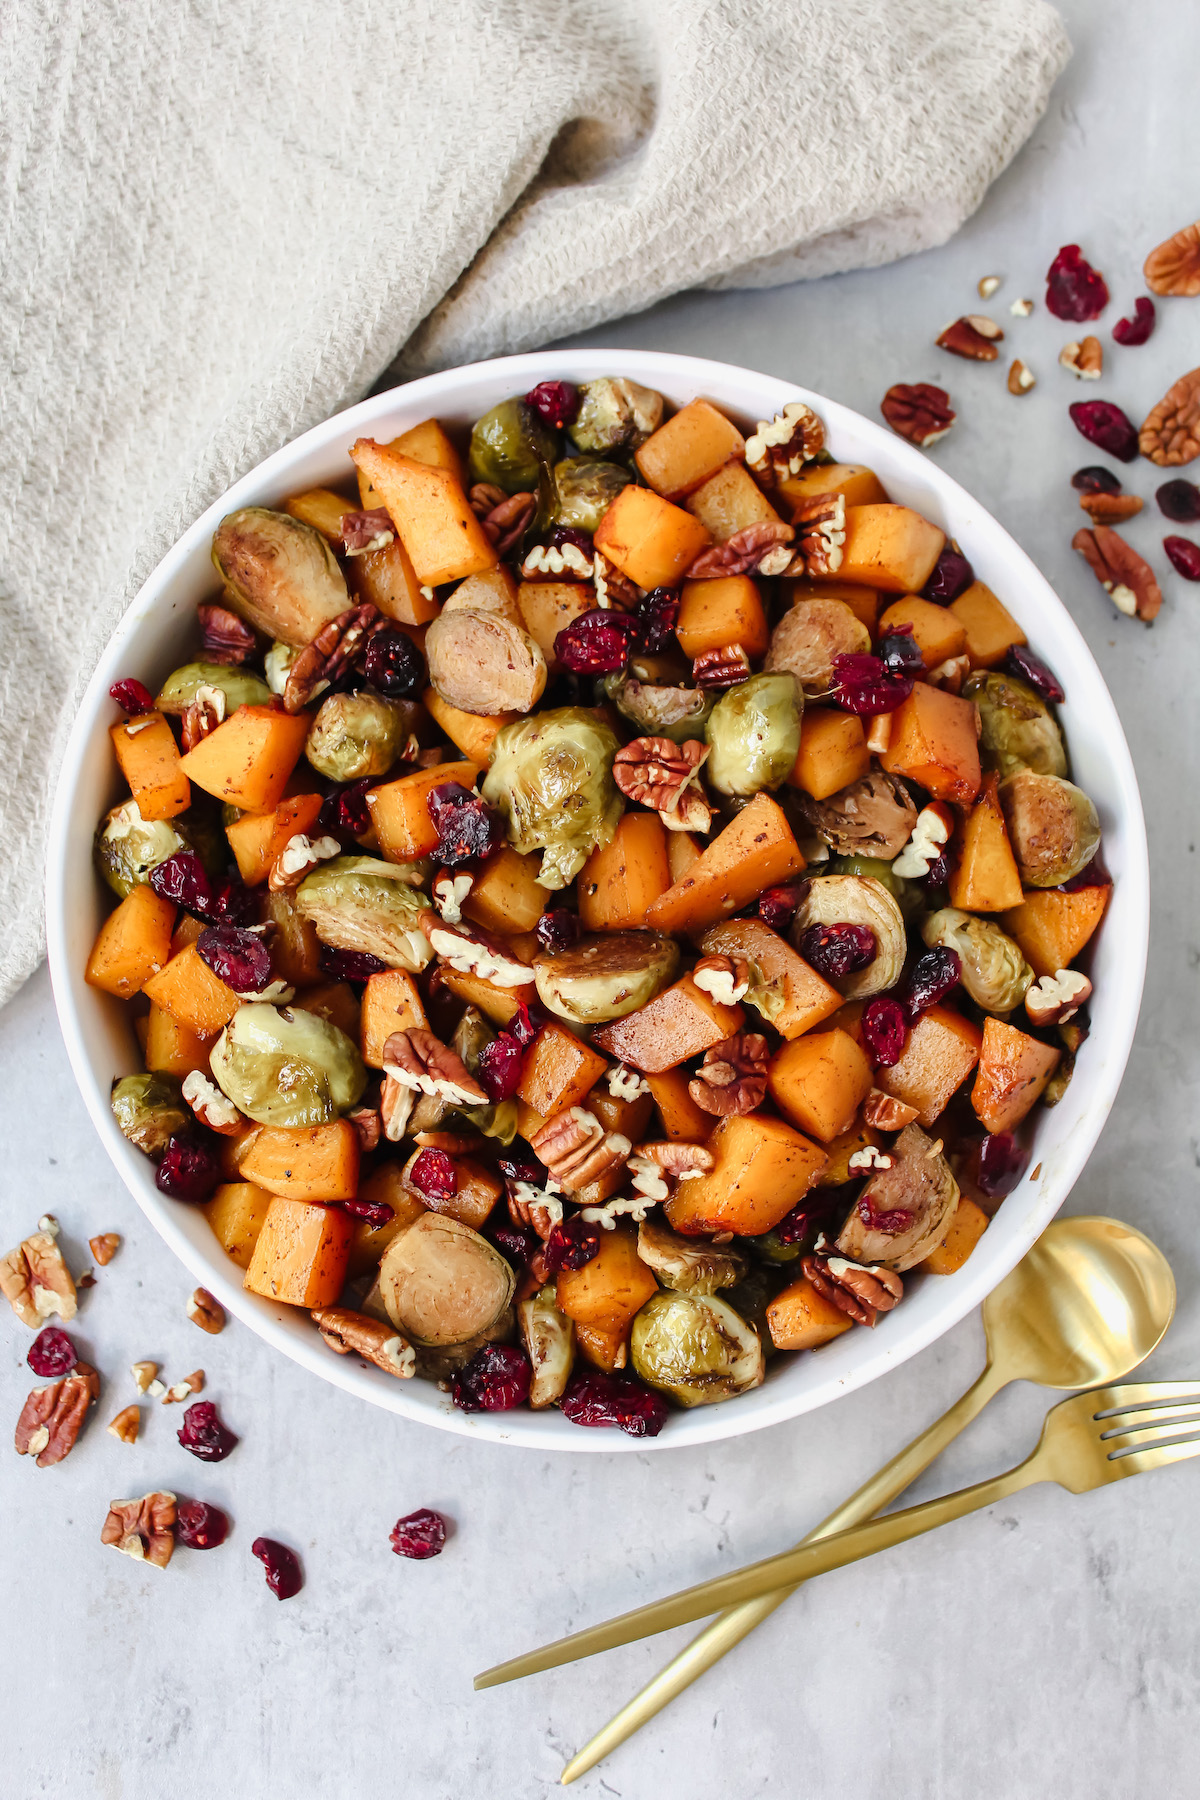 Roasted Maple Balsamic Spiced Butternut Squash and Brussels Sprouts (vegan, gluten-free)